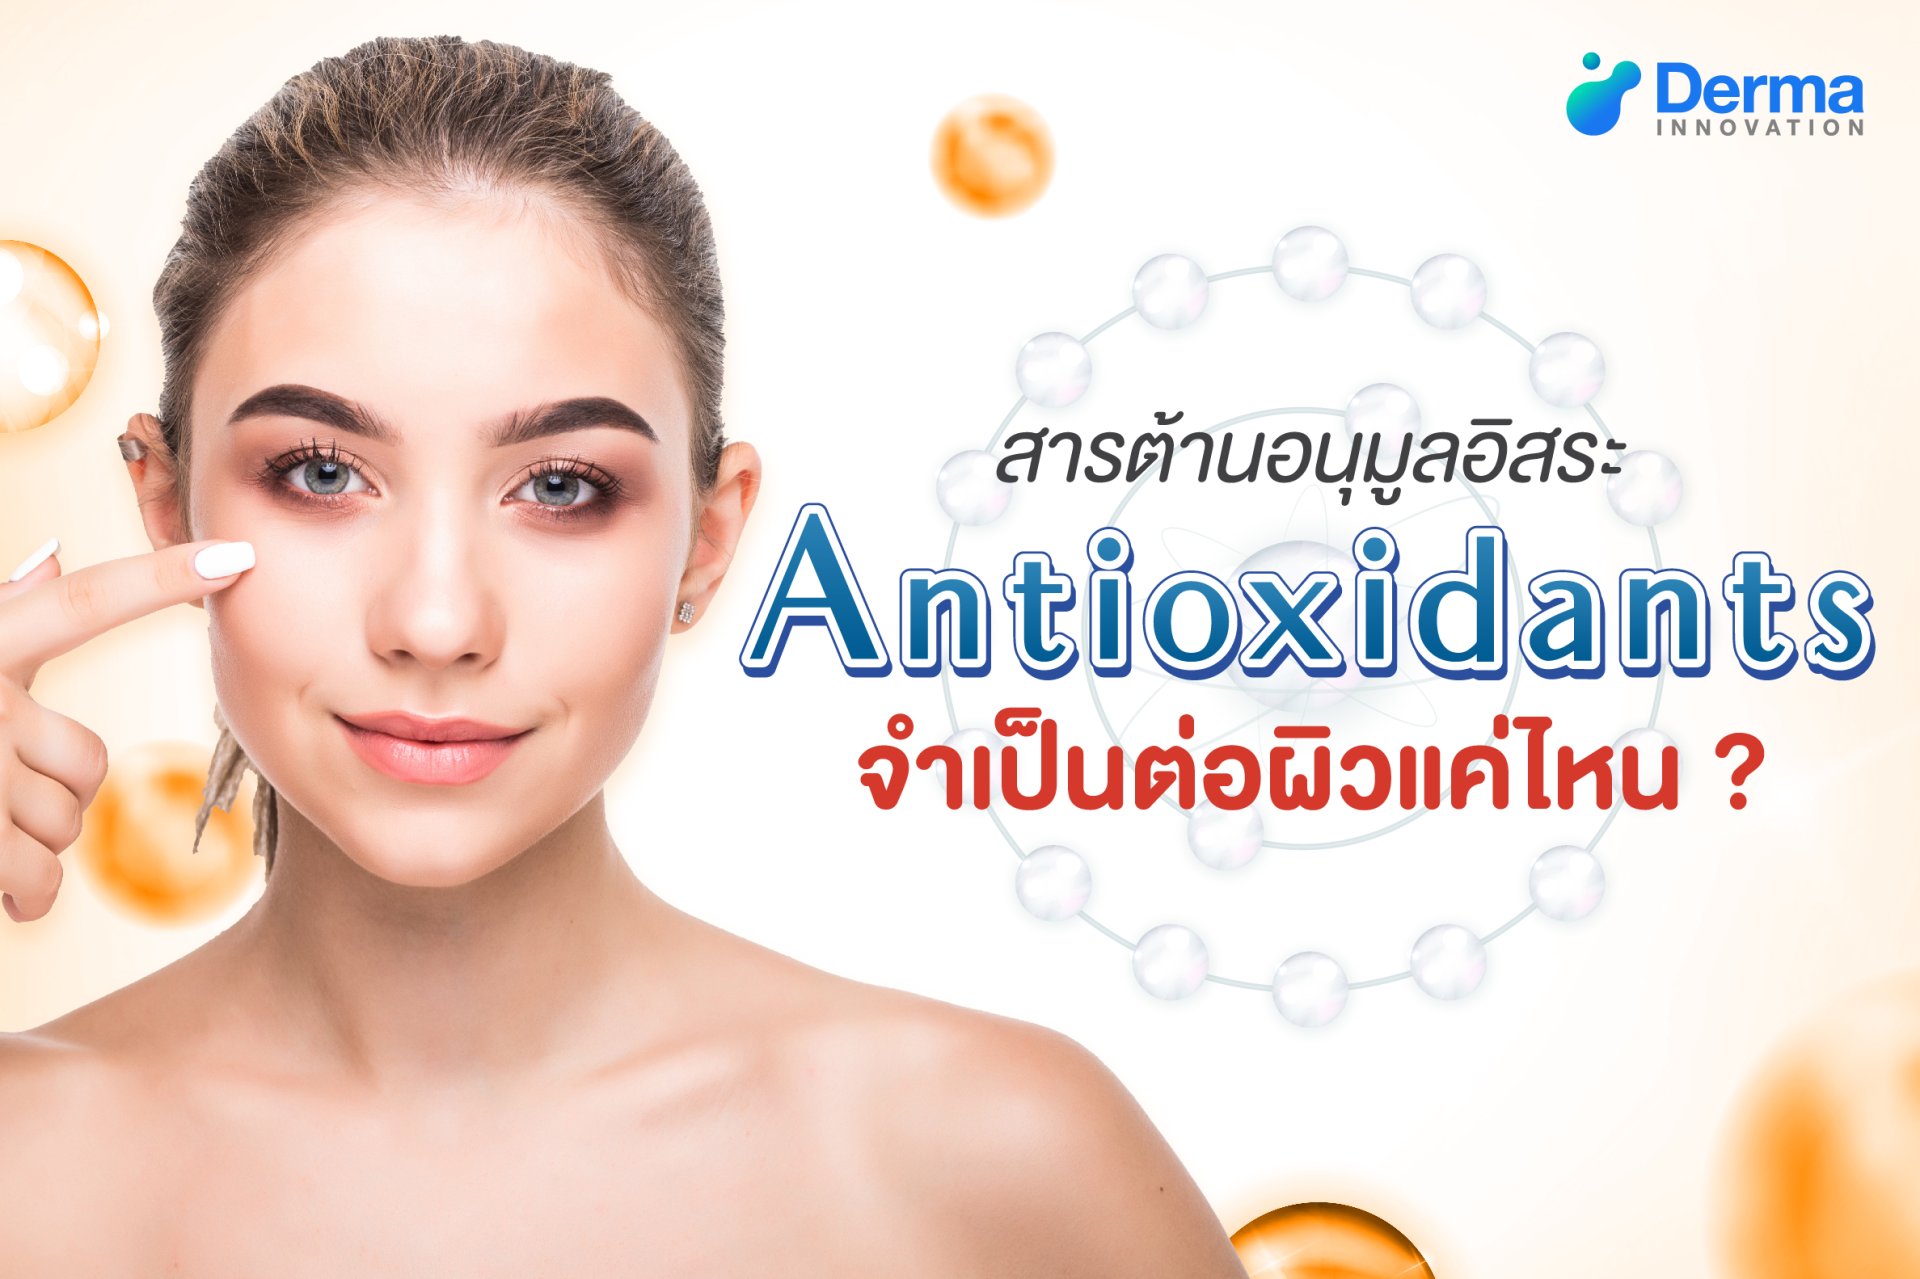 How important are antioxidants for the skin?